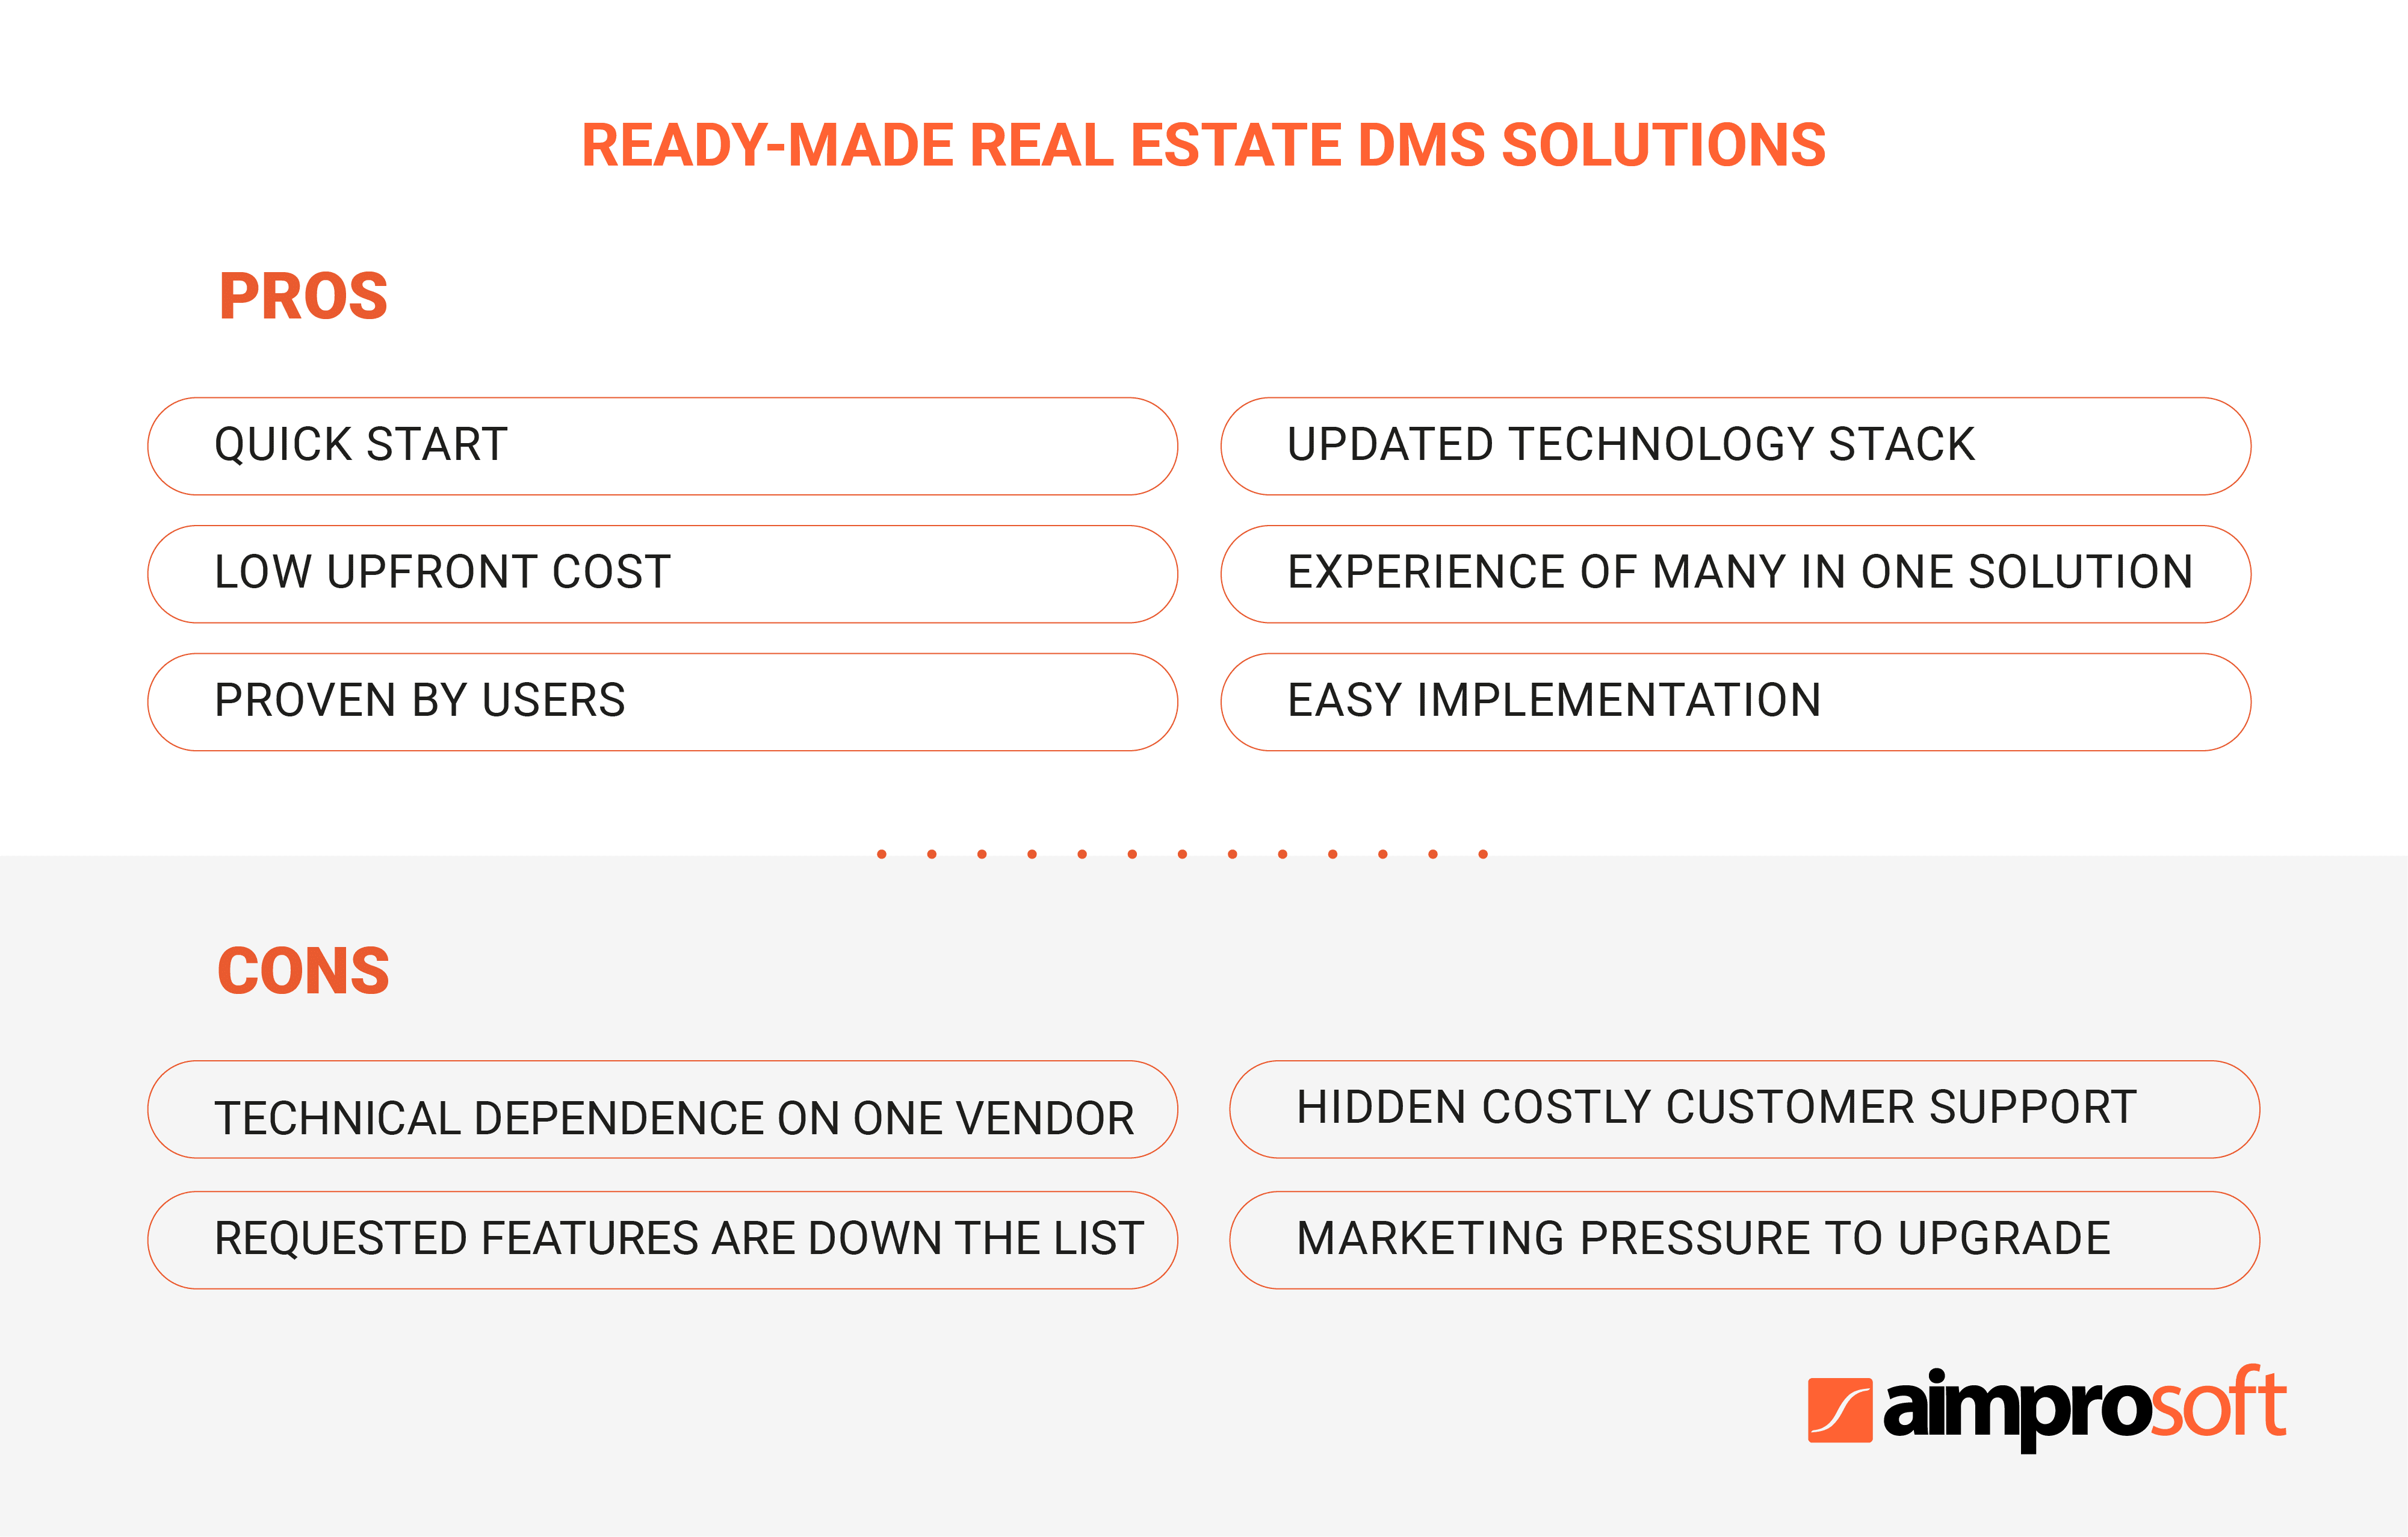 Real estate ready-made solution: pros and cons of document management software